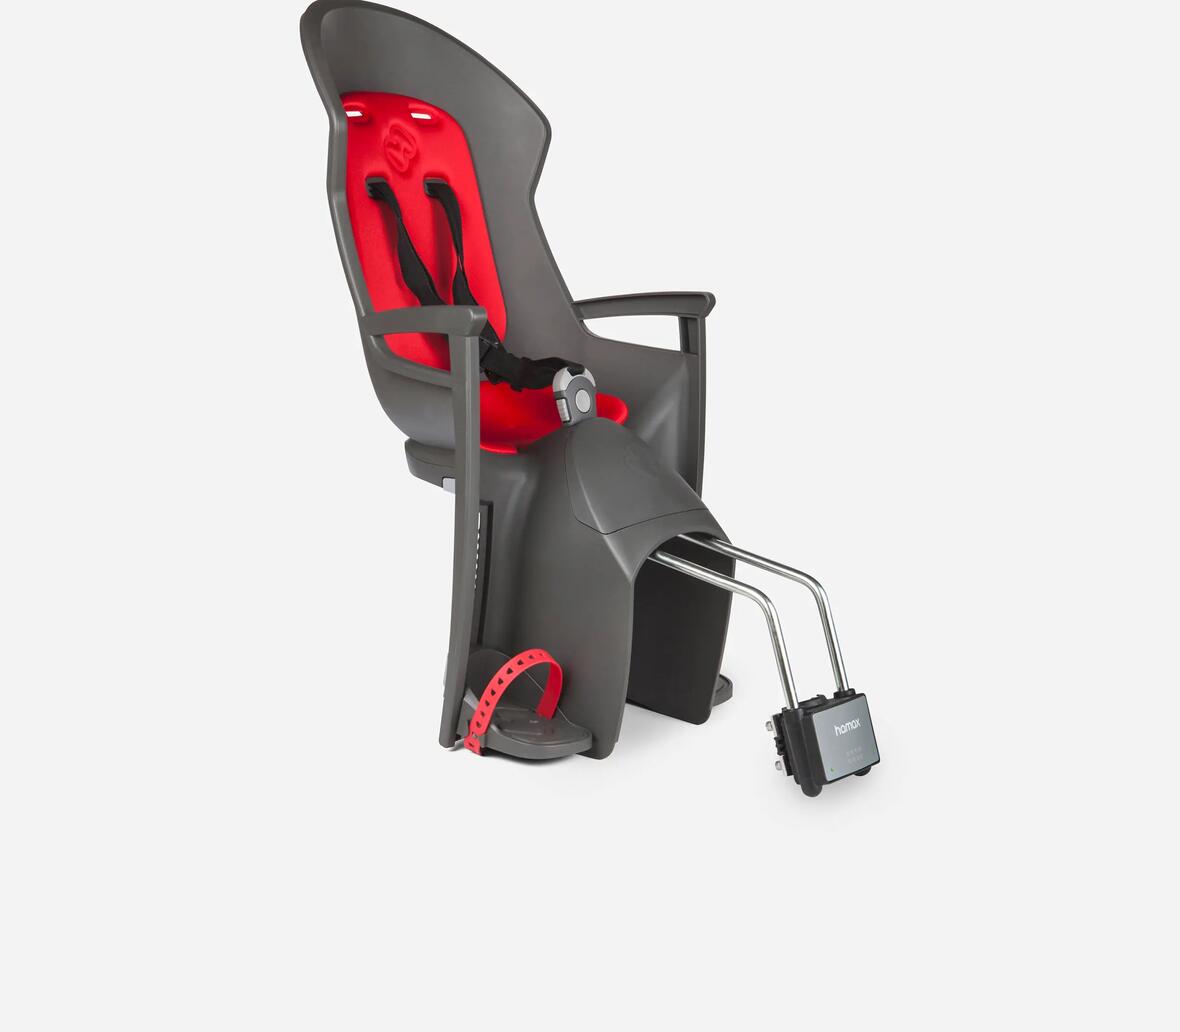 WHICH CHILD SEAT IS COMPATIBLE?&nbsp;